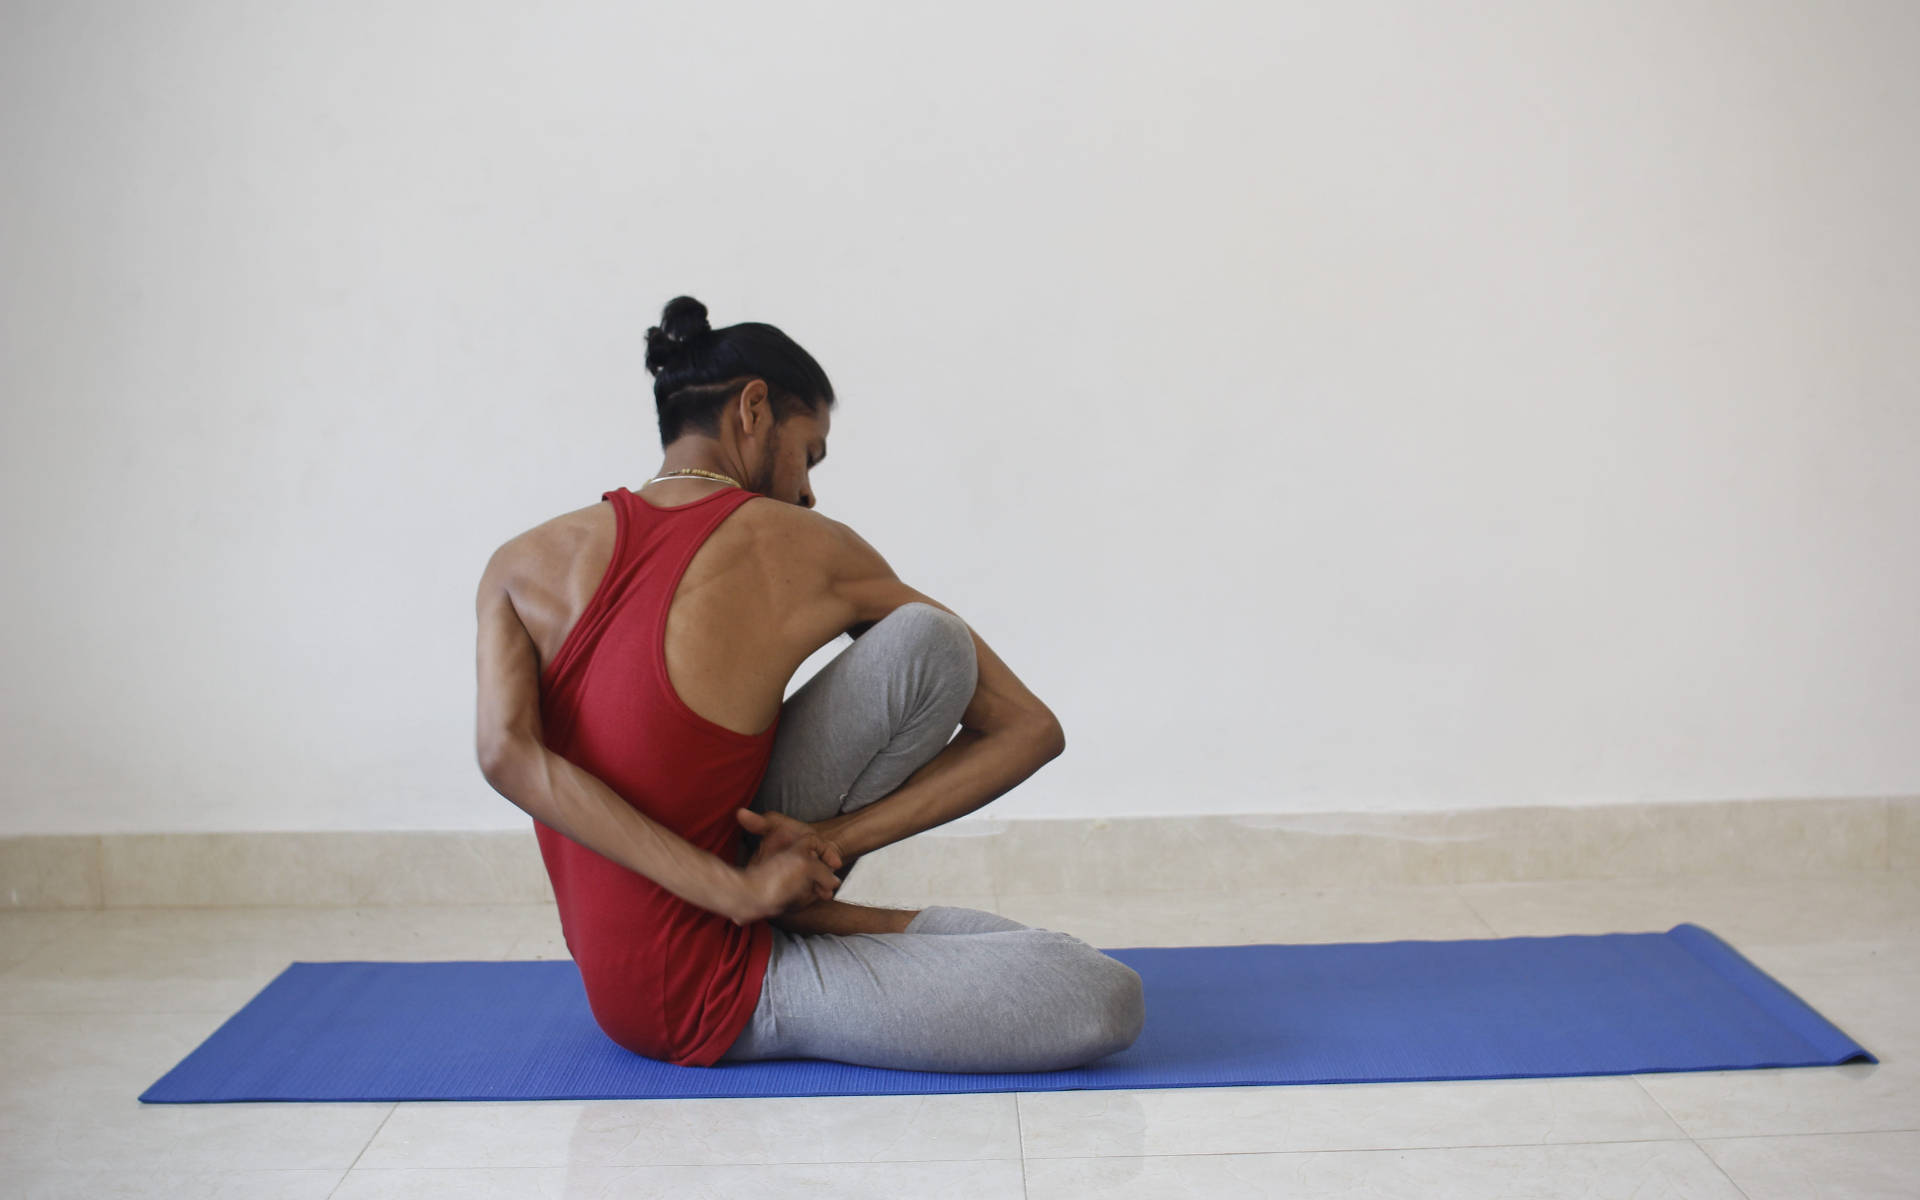 Man Yoga In Blue Mat Background